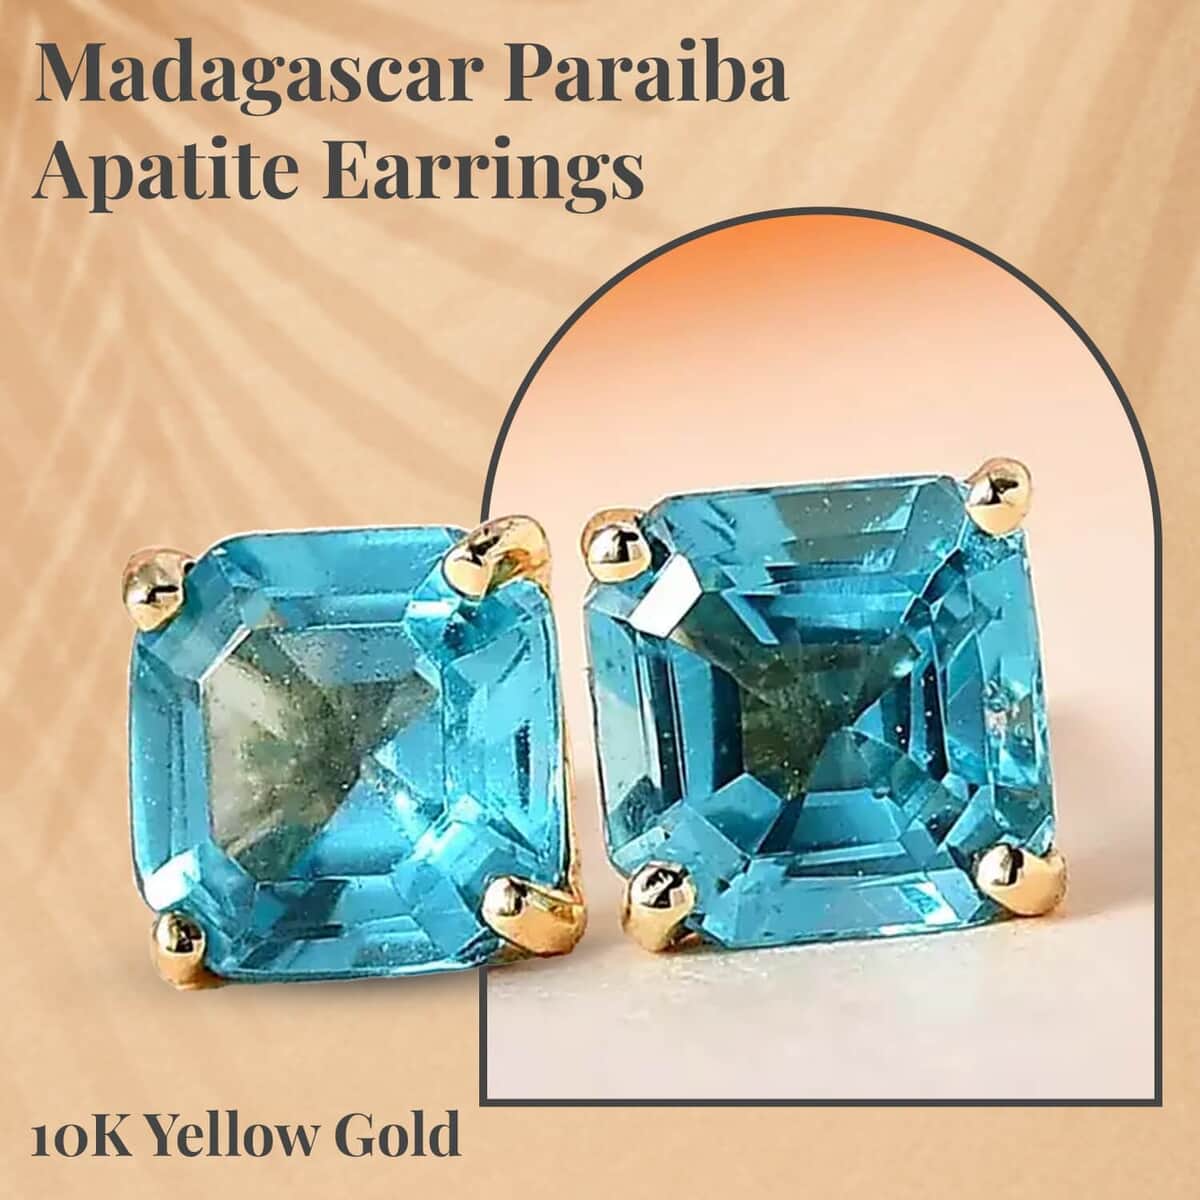 Luxoro 10K Yellow Gold Premium Madagascar Paraiba Apatite Earrings, Solitaire Stud, Gold Solitaire Earrings, Weddings Gifts 1.30 ctw image number 2